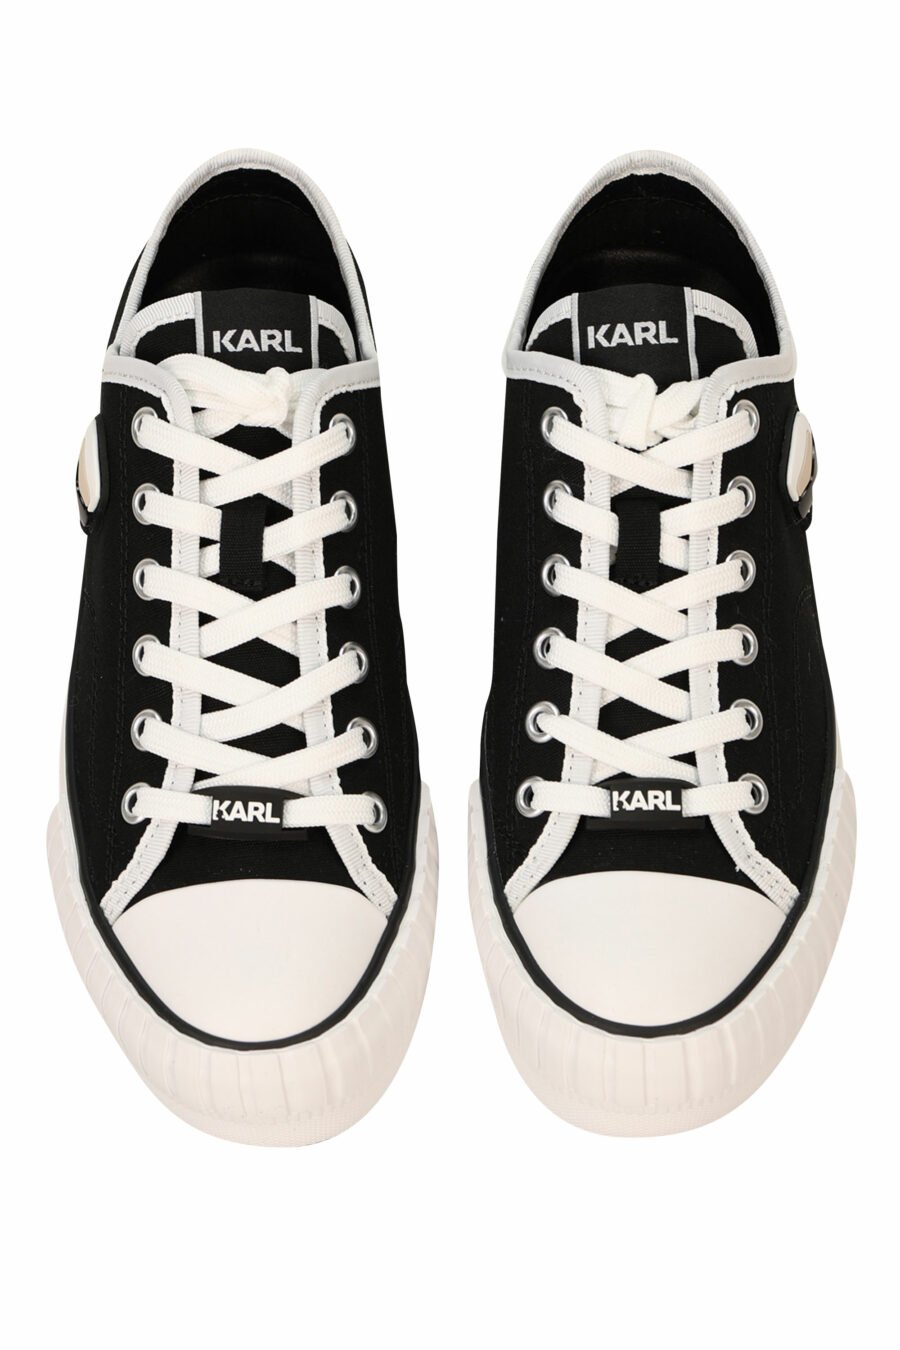 Black converse-style trainers with rubber mini-logo "karl" - 5059529384554 4